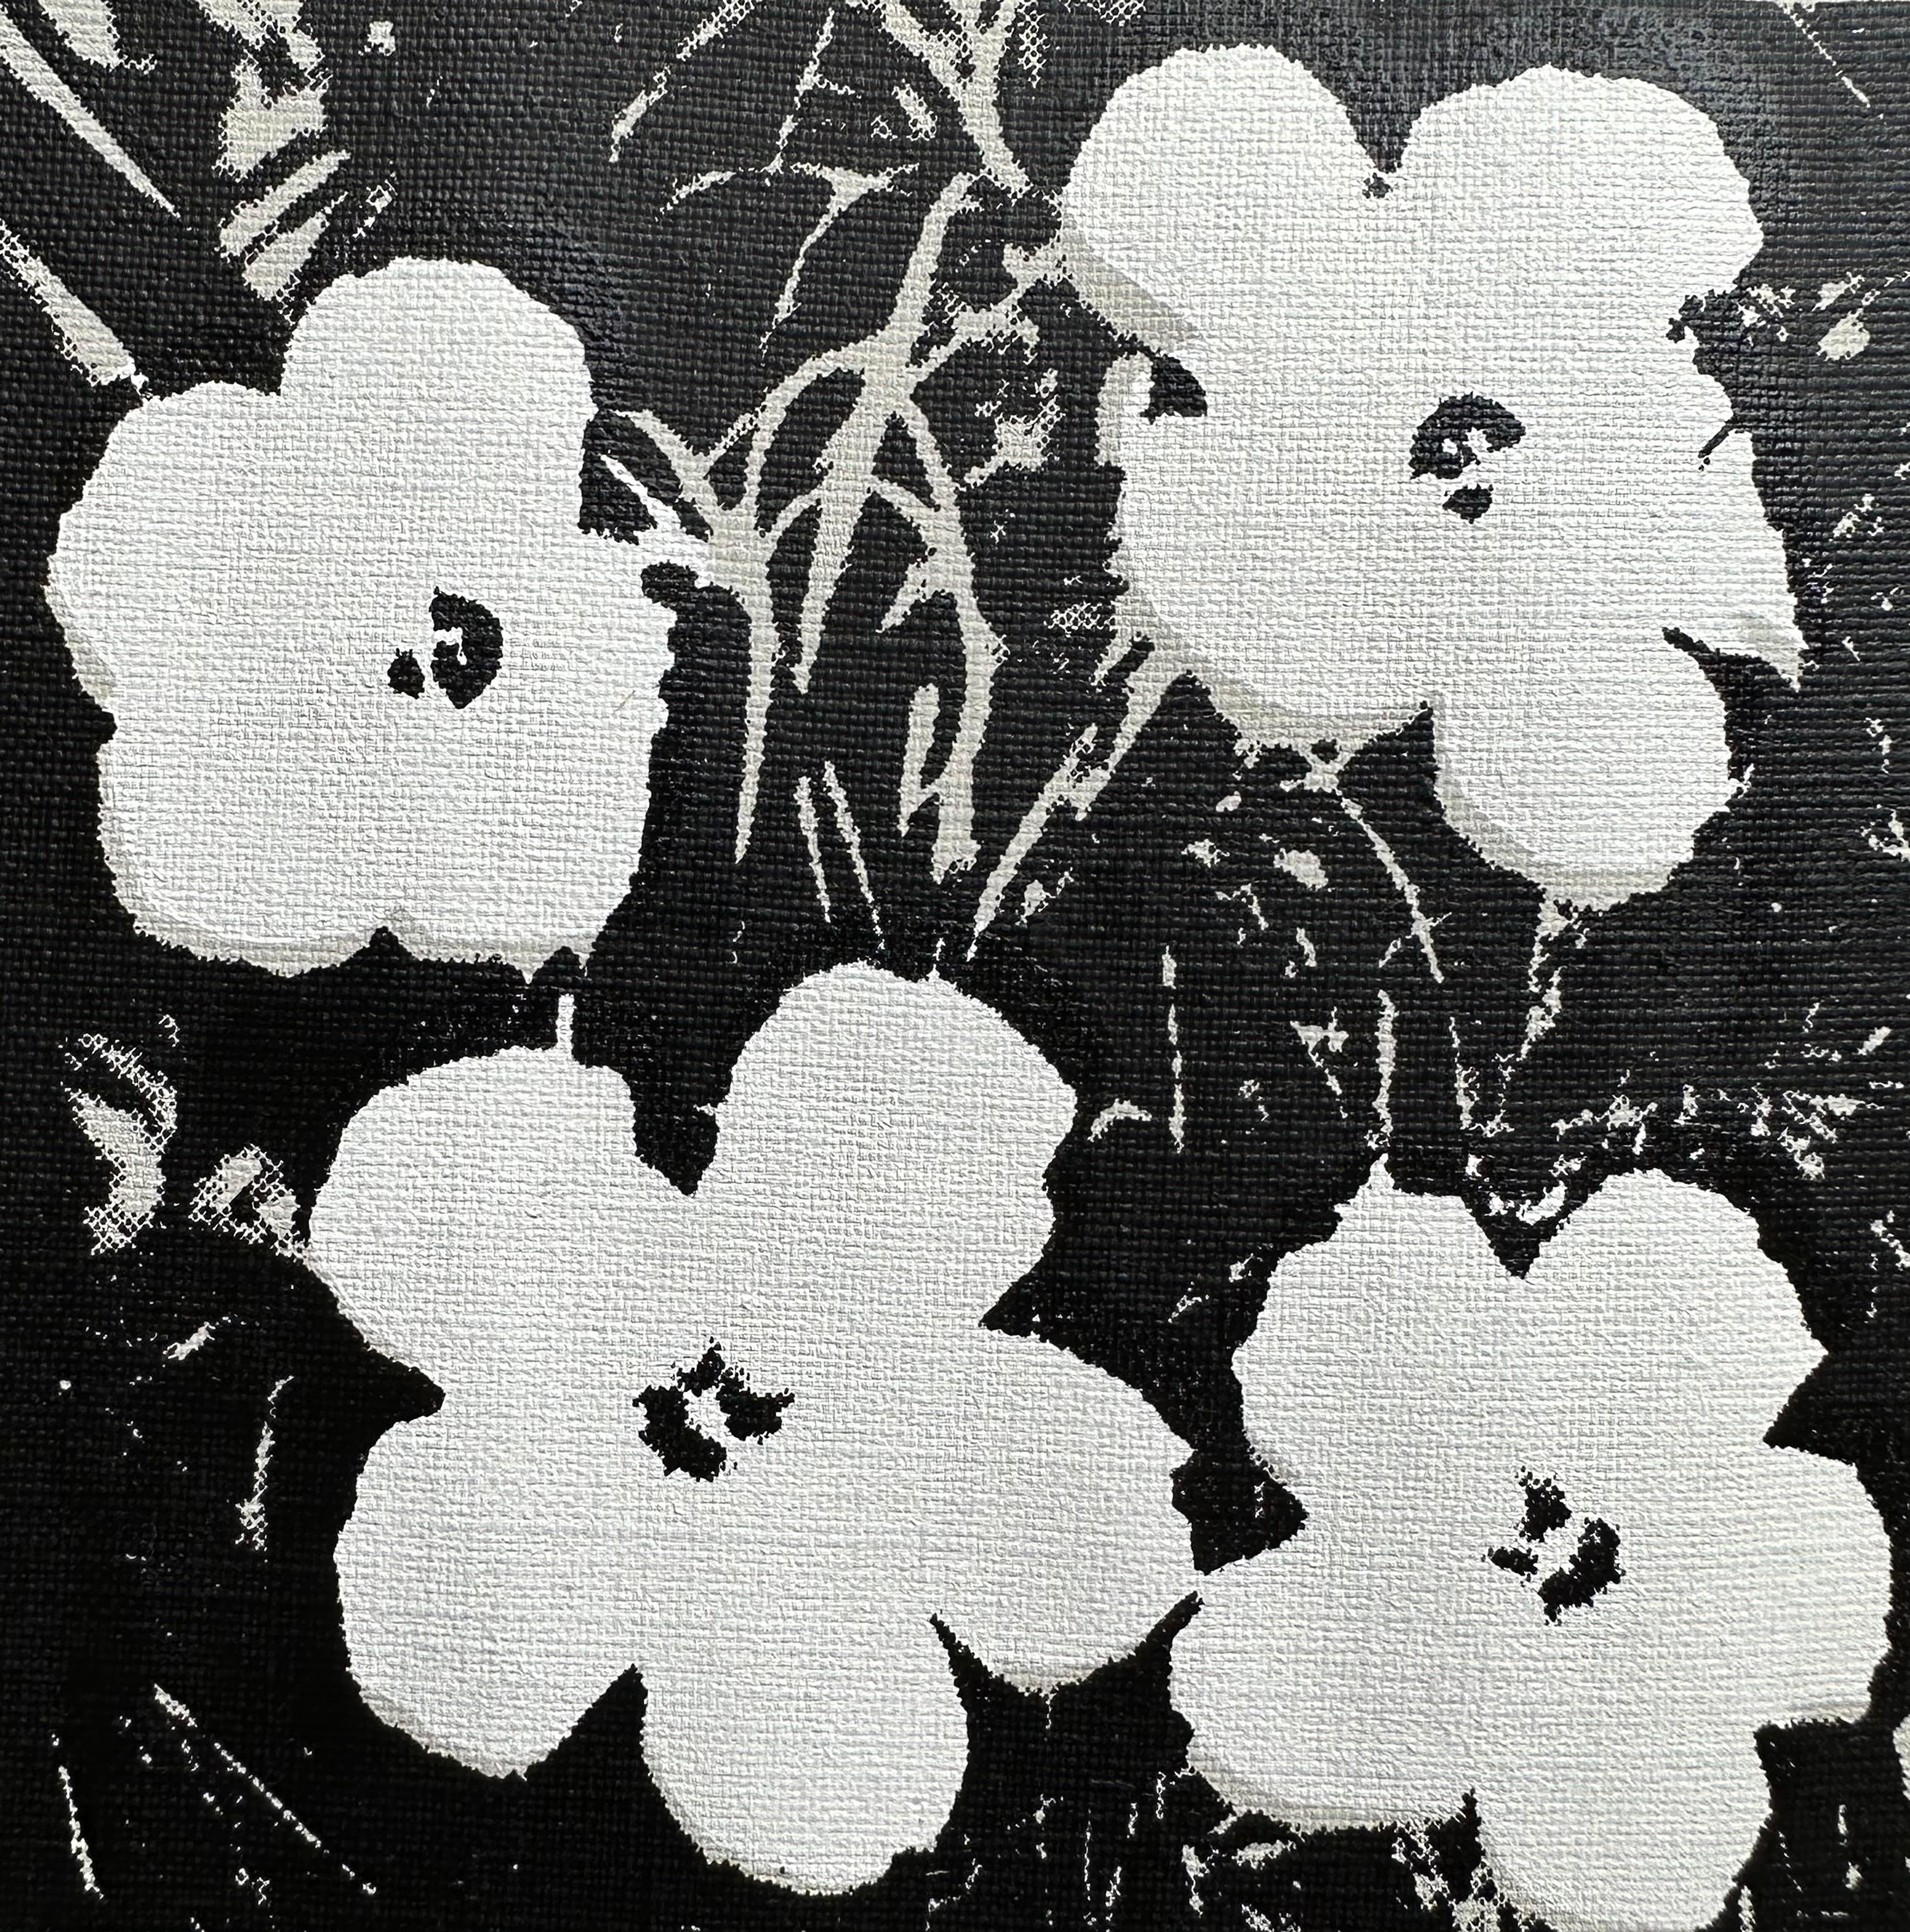 Denied Warhol Flowers, (White) Silkscreen Painting by Charles Lutz
Silkscreen and acrylic on canvas with Denied stamp of the Andy Warhol Art Authentication Board.
5 x 5